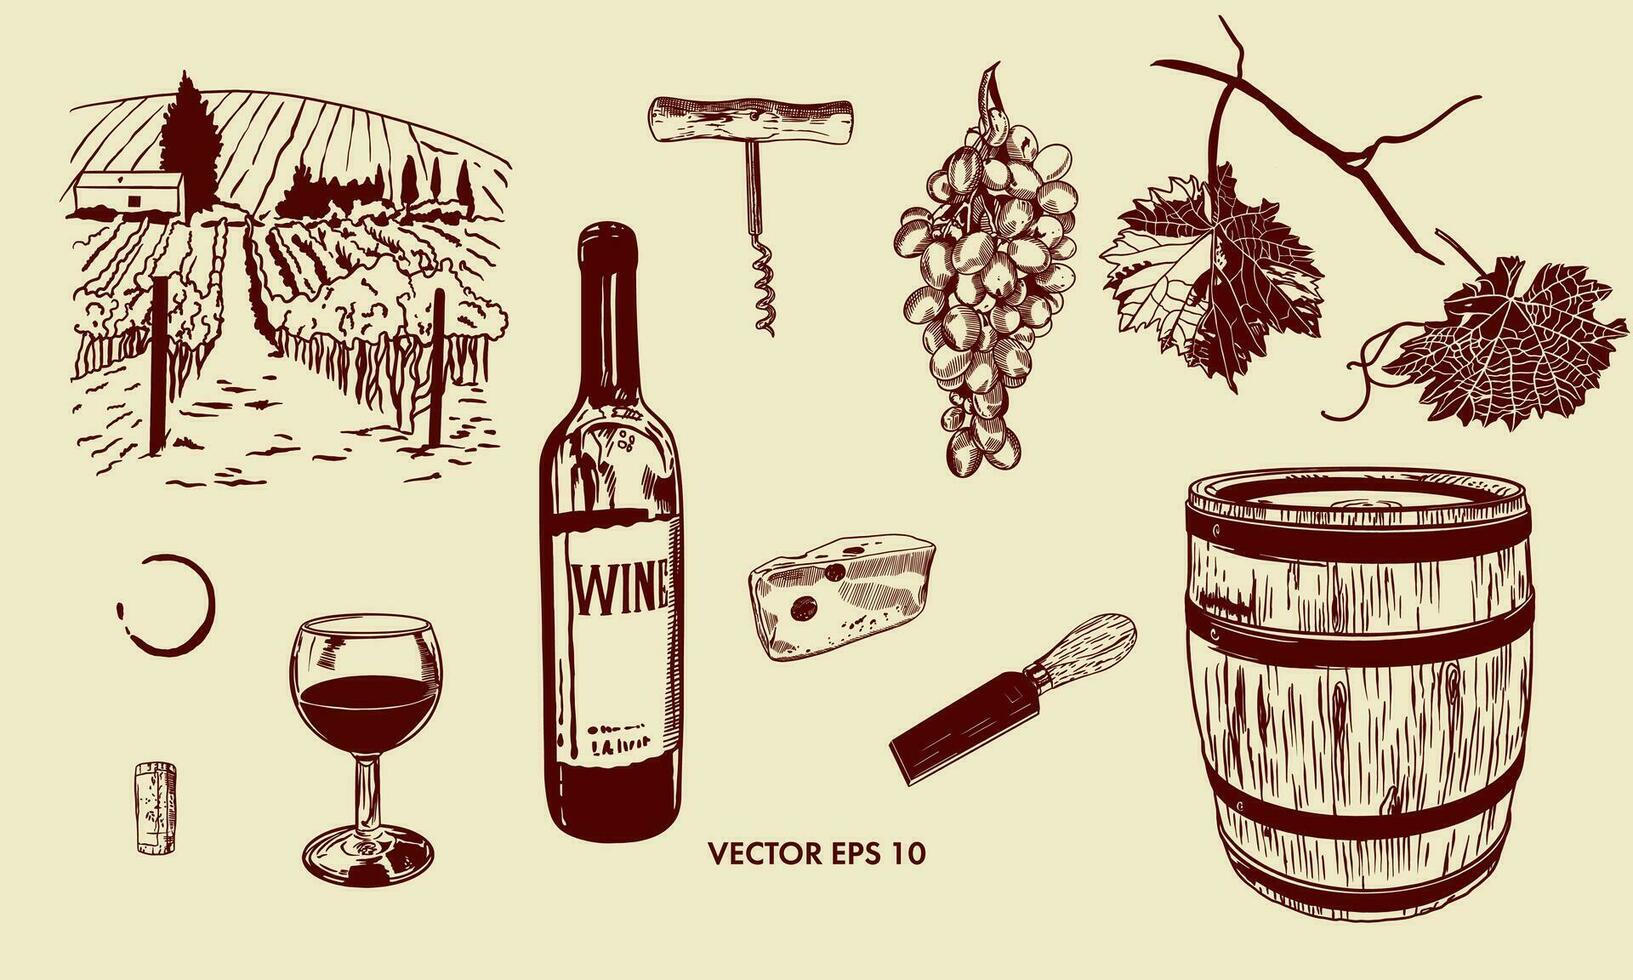 Bottle, glass, barrel of wine, grapes, leaves, cheese, vineyards, bottle opener. Vector illustration of a wine set in graphic style. Design element for menus, wine lists, labels, banners, flyers.